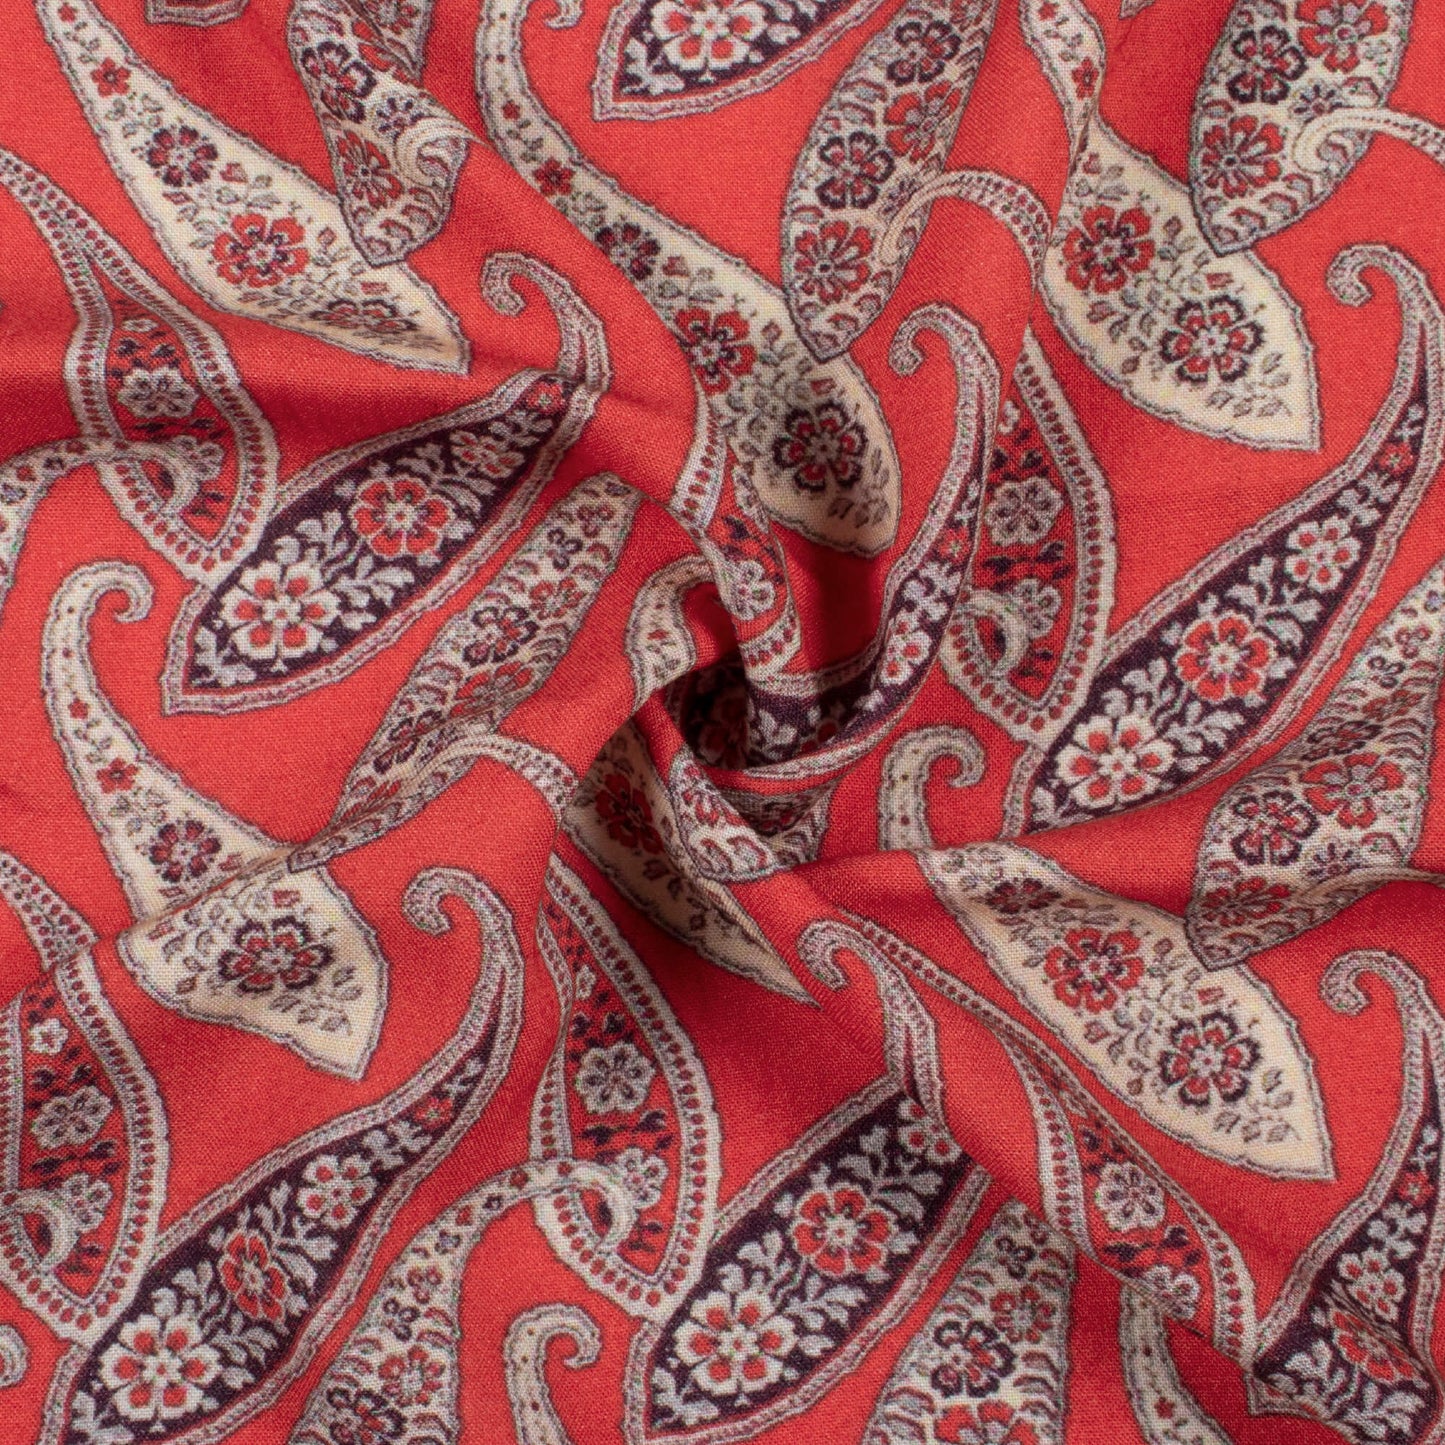 Vermilion Red And Beige Paisley Pattern Digital Print Viscose Rayon Fabric (Width 58 Inches)